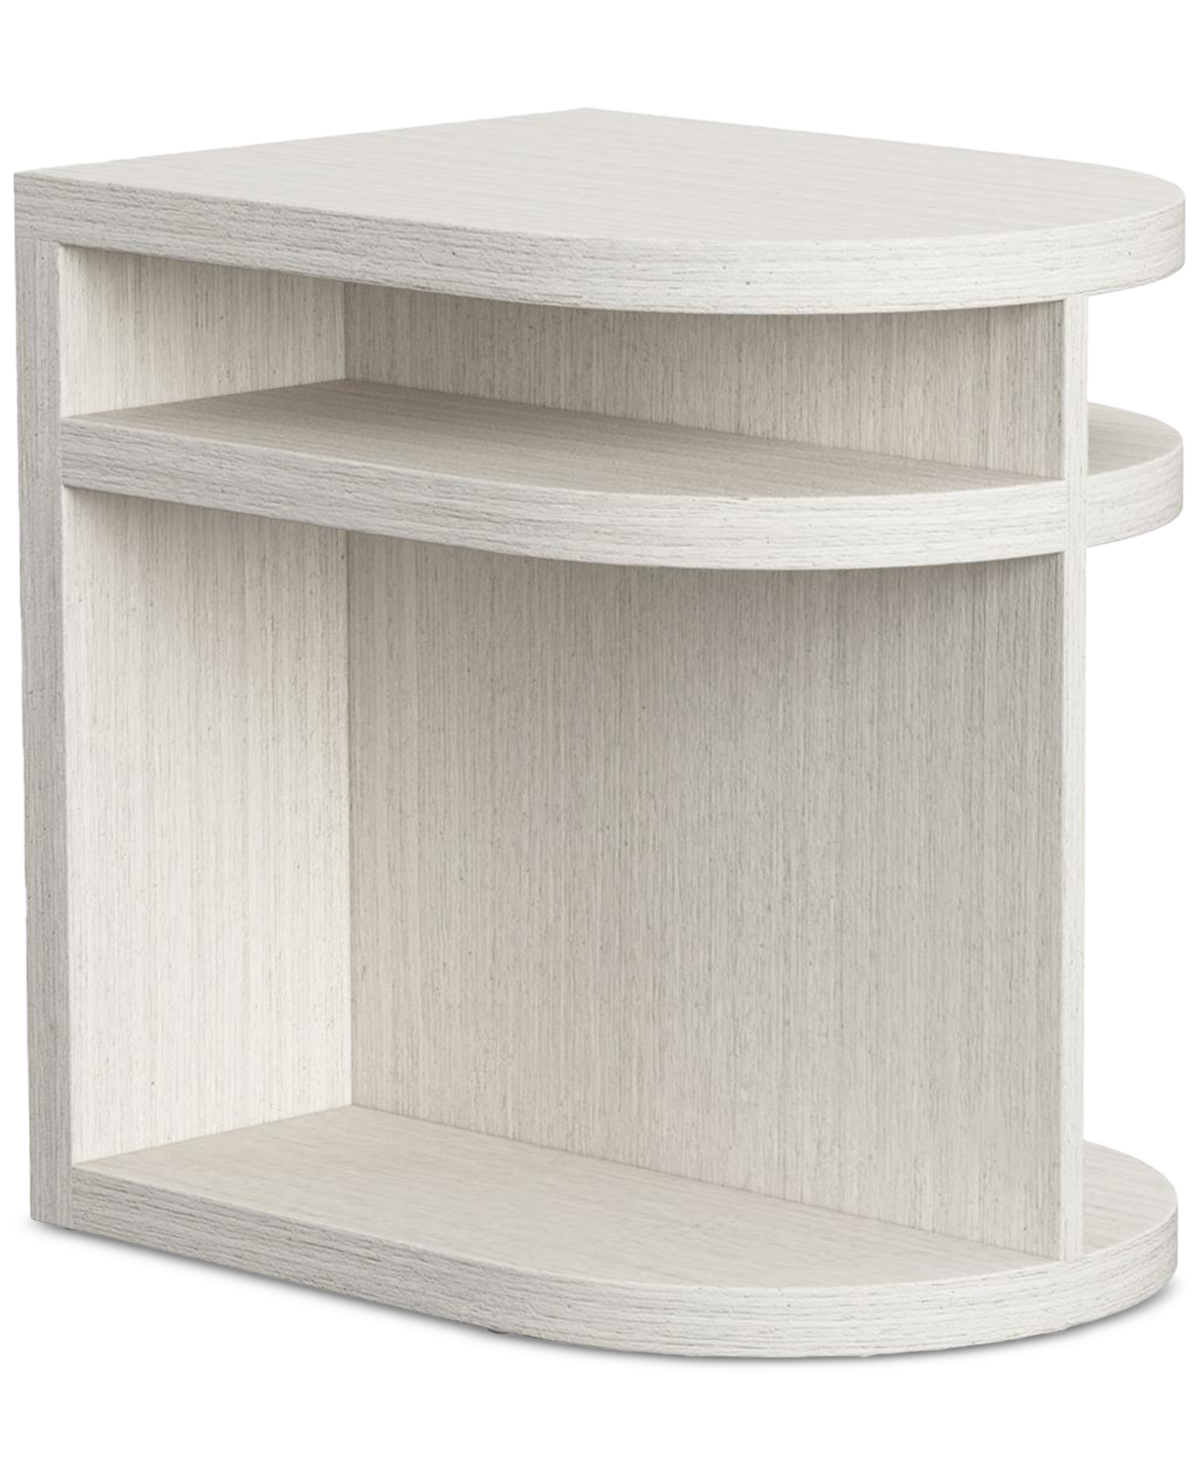 Bernhardt Stratum Side Table With Shelf In No Color